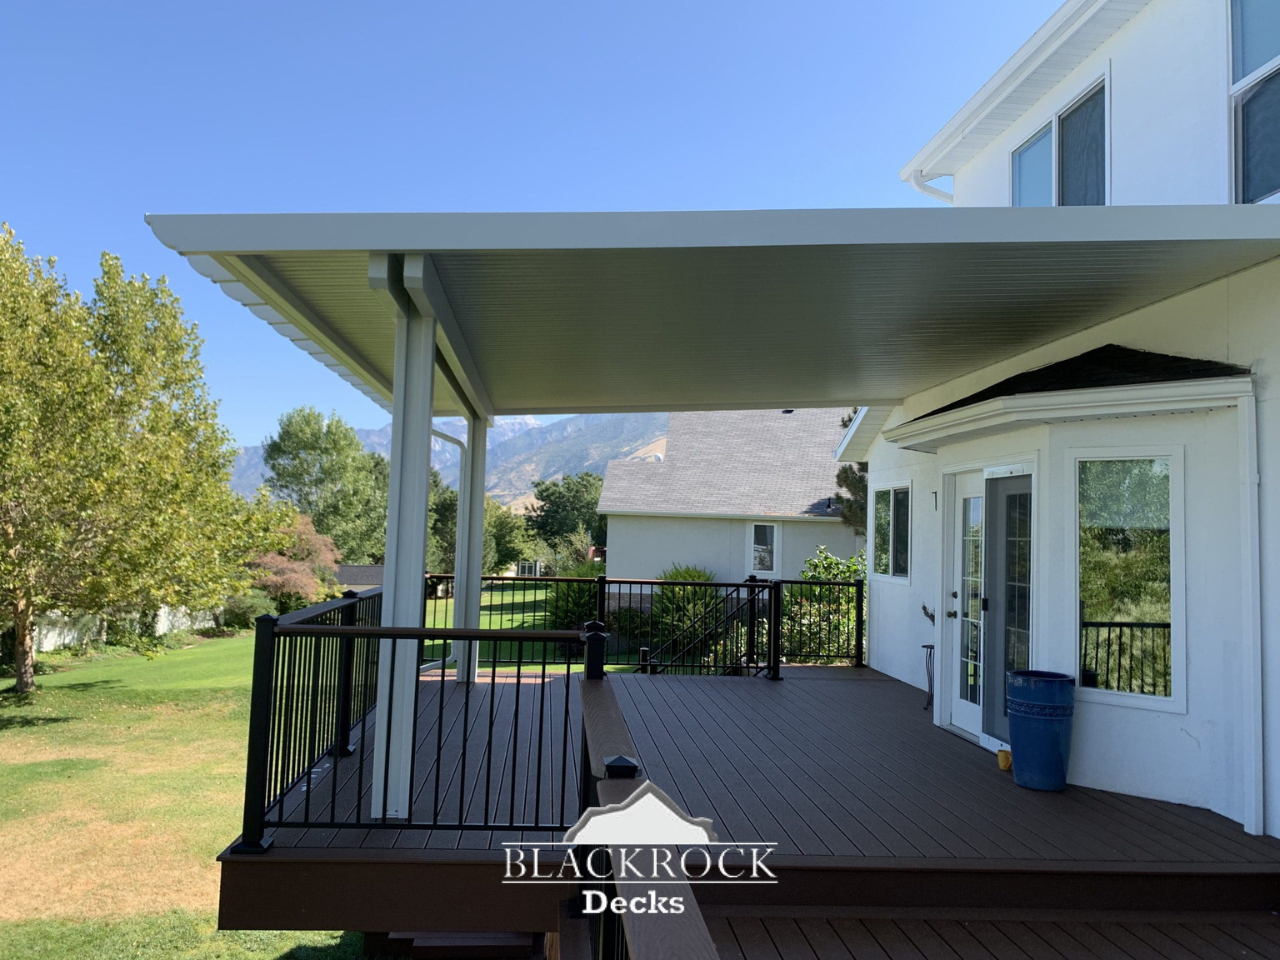 Blackrock Decks specializes in the creation of Pleasant Grove Utah Decks, Pergolas, and Patio Covers. Contact our team for a quote.